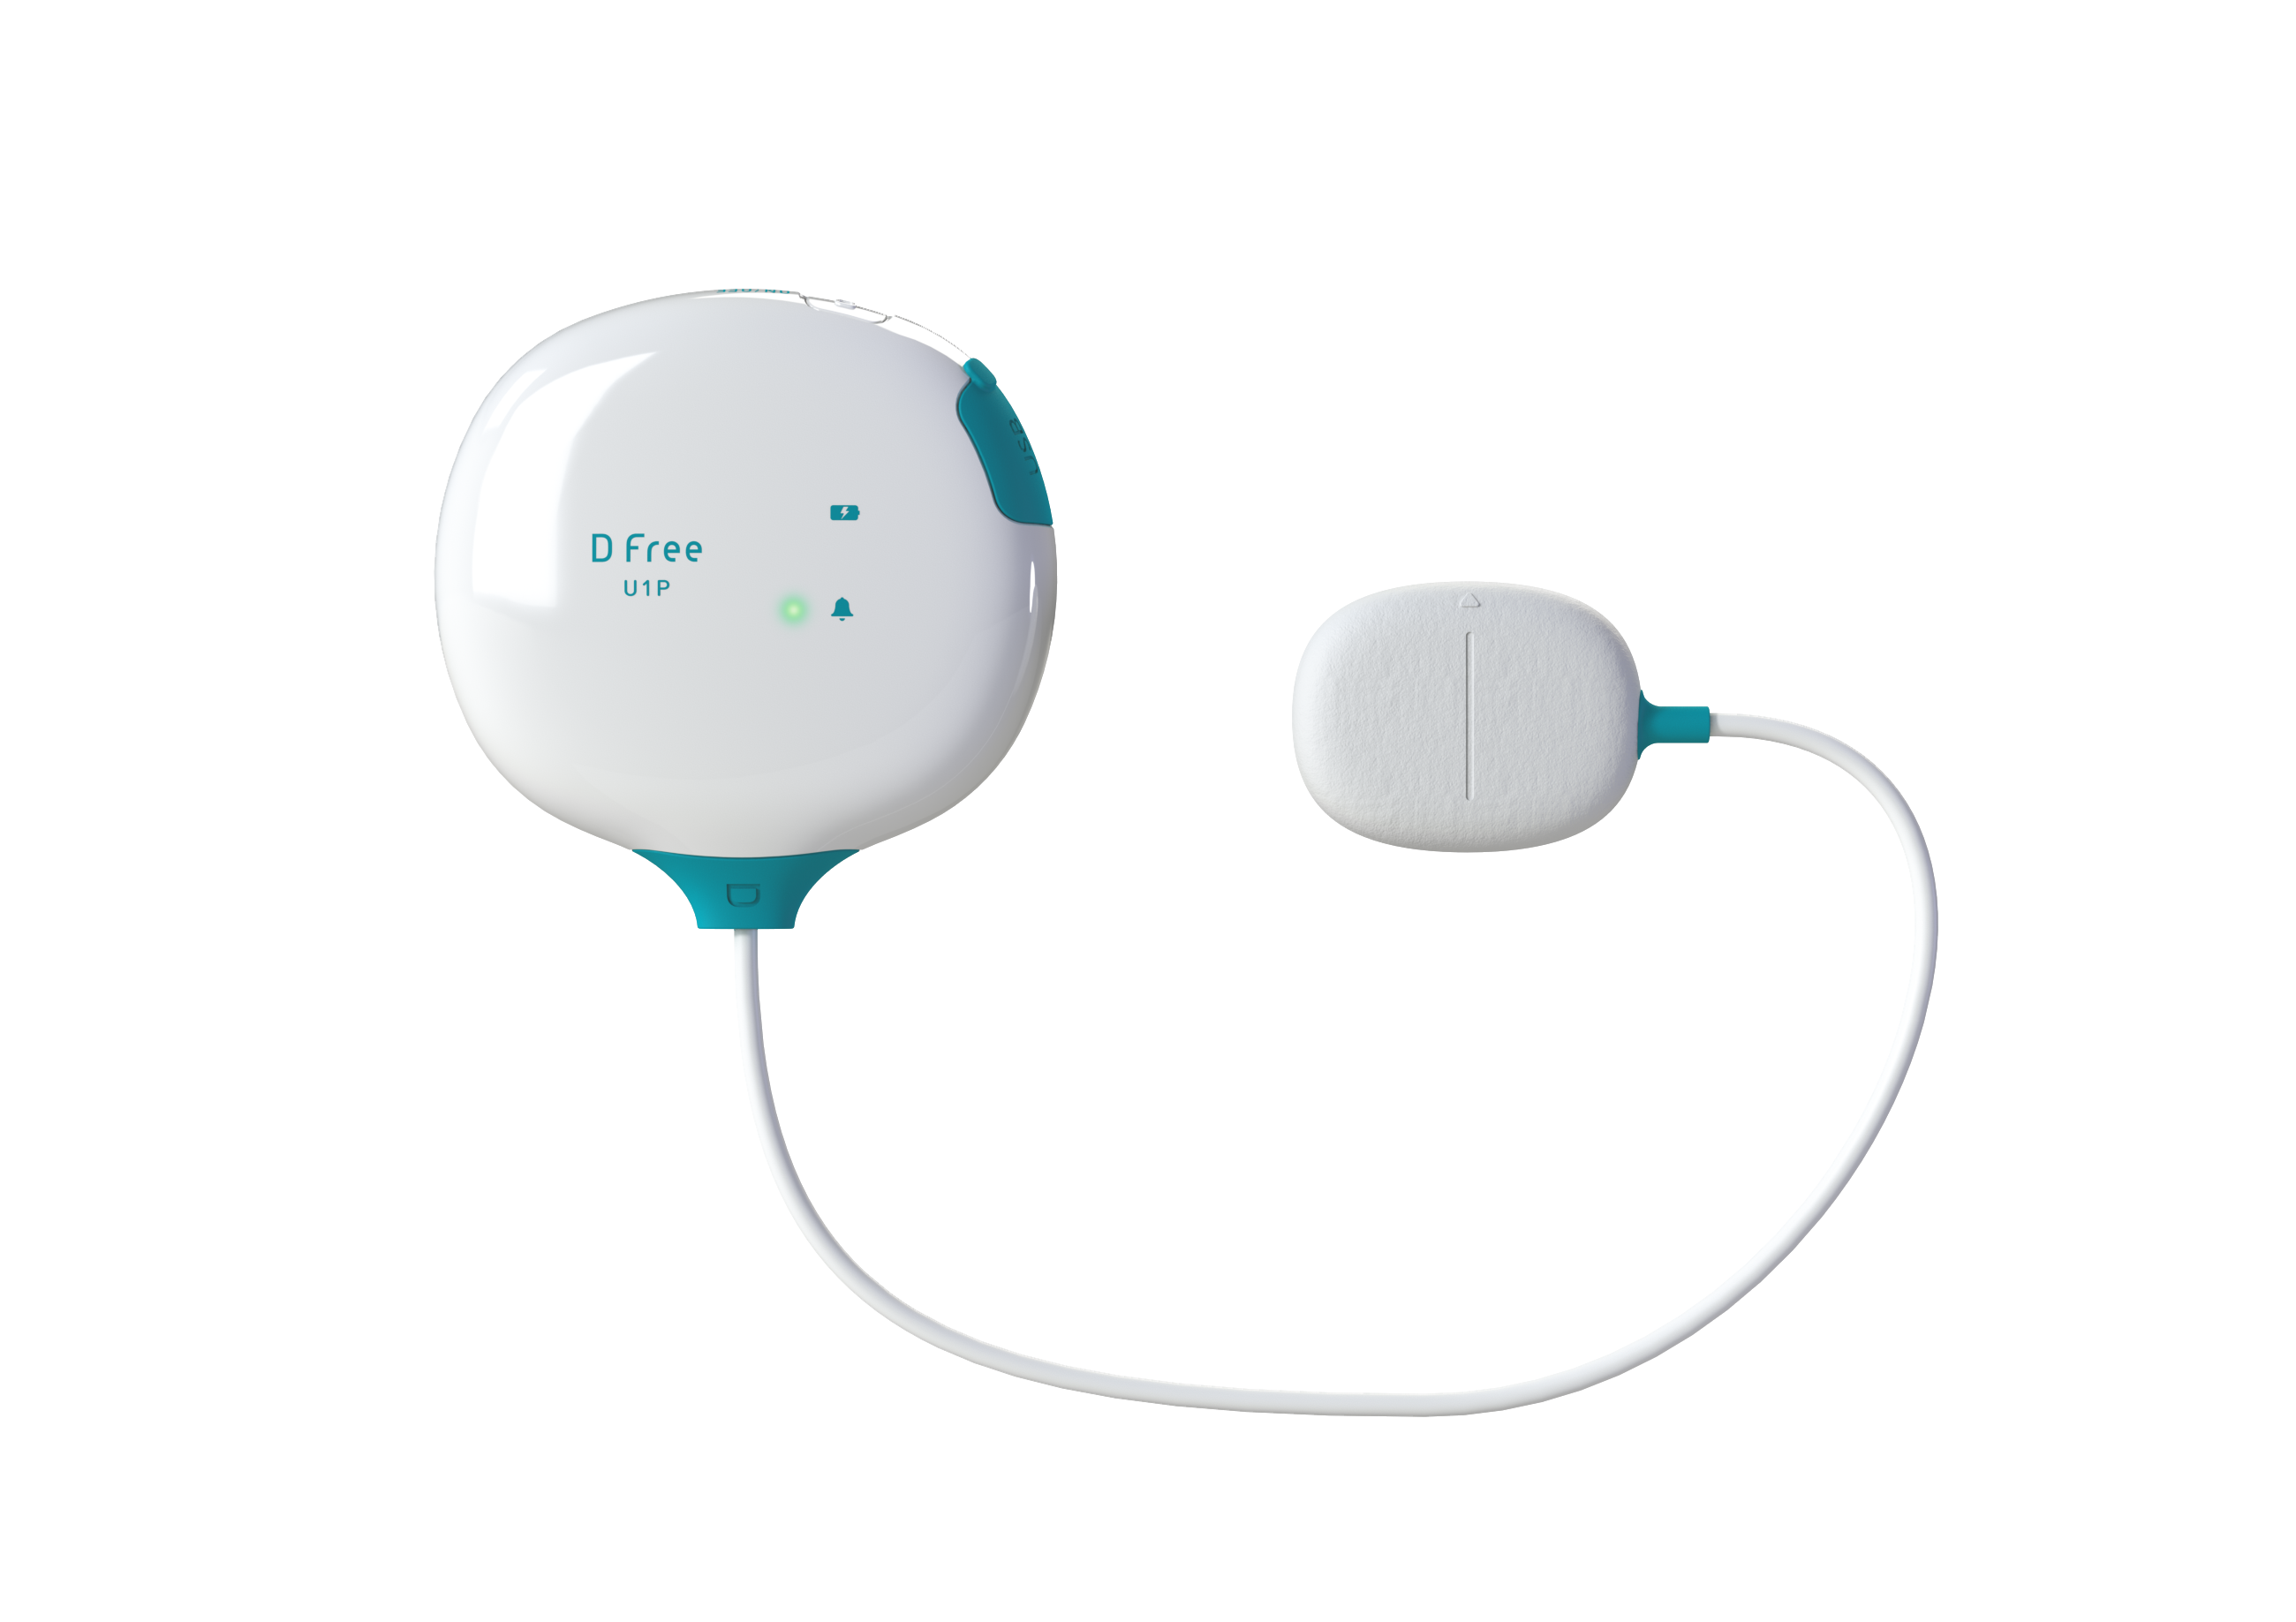 DFree is the first health tech wearable device for urinary incontinence that notifies the user via a smartphone or tablet when to go to the bathroom.